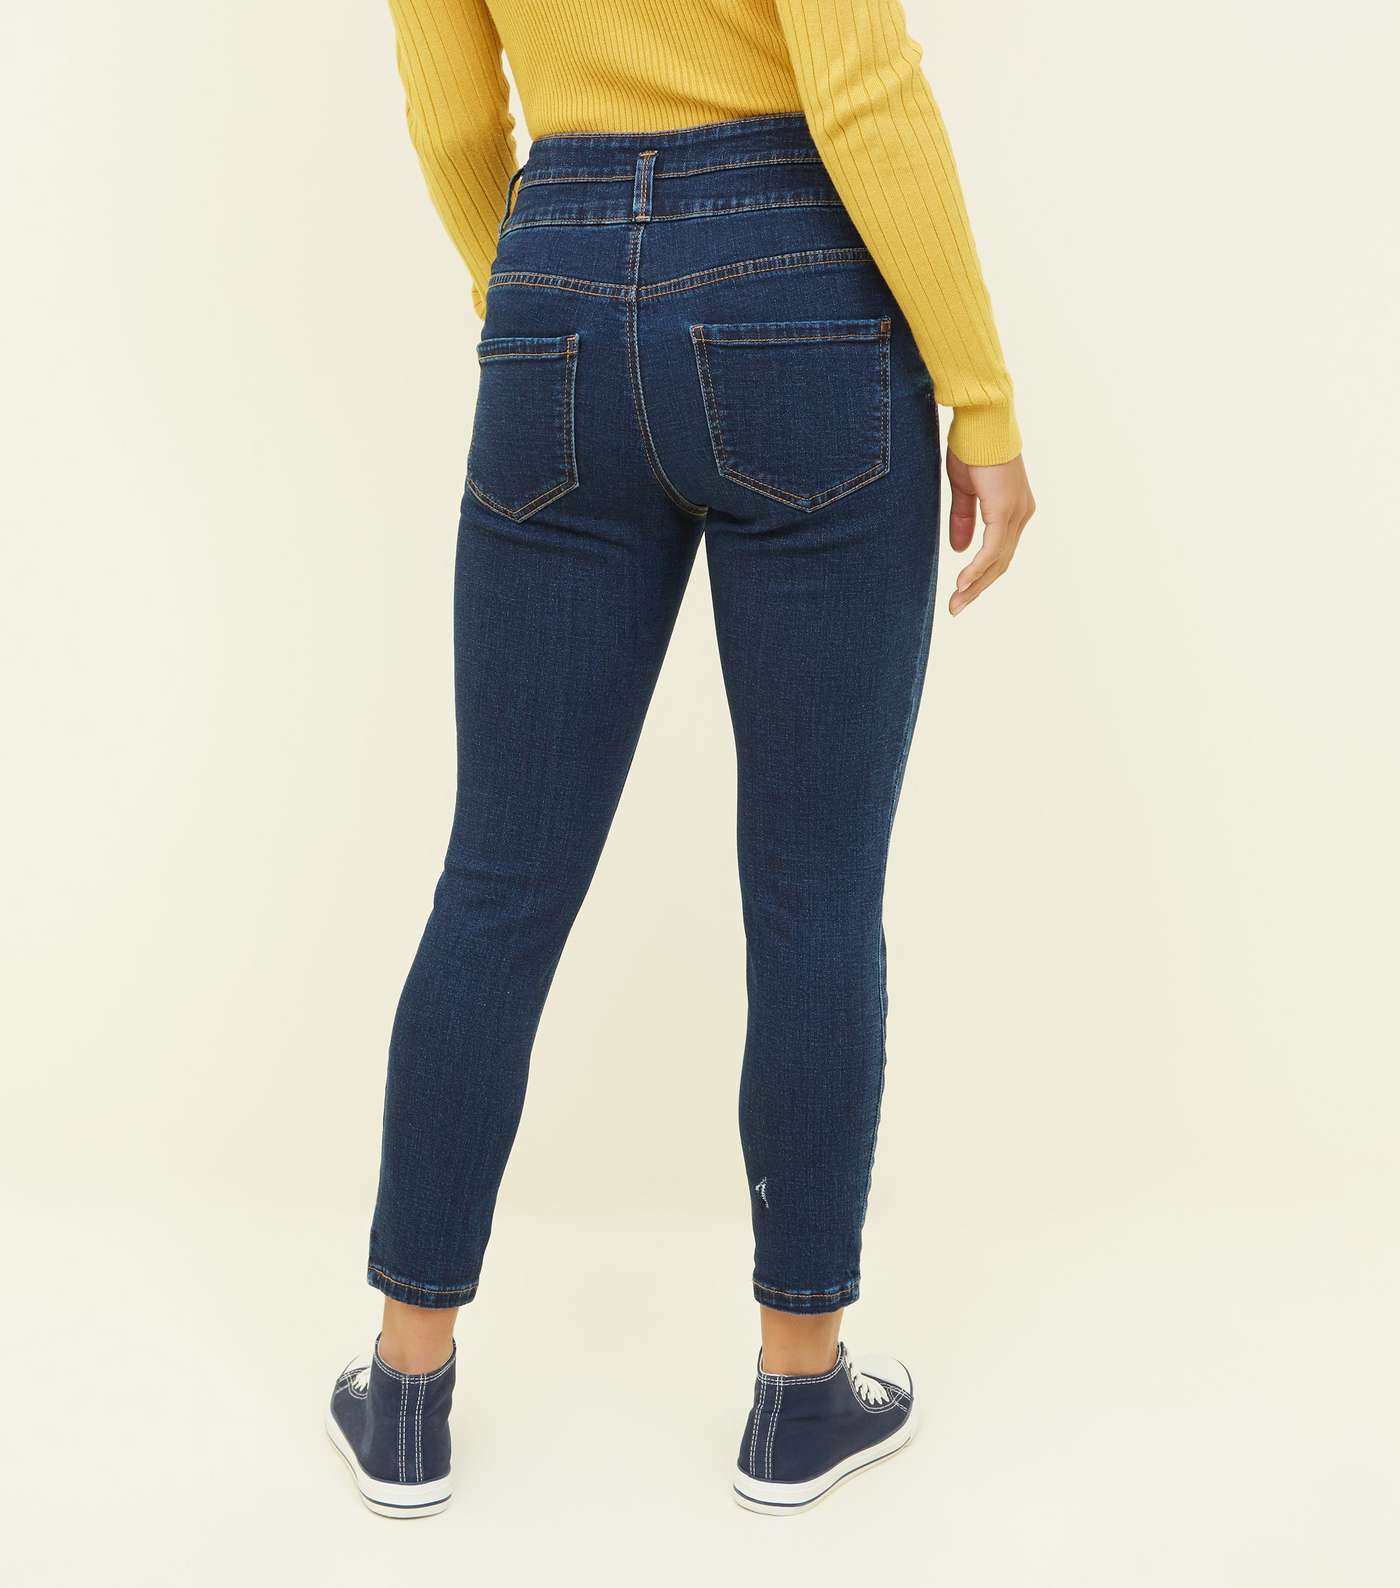 Petite Blue 26in High Waist Skinny Jeans Image 3